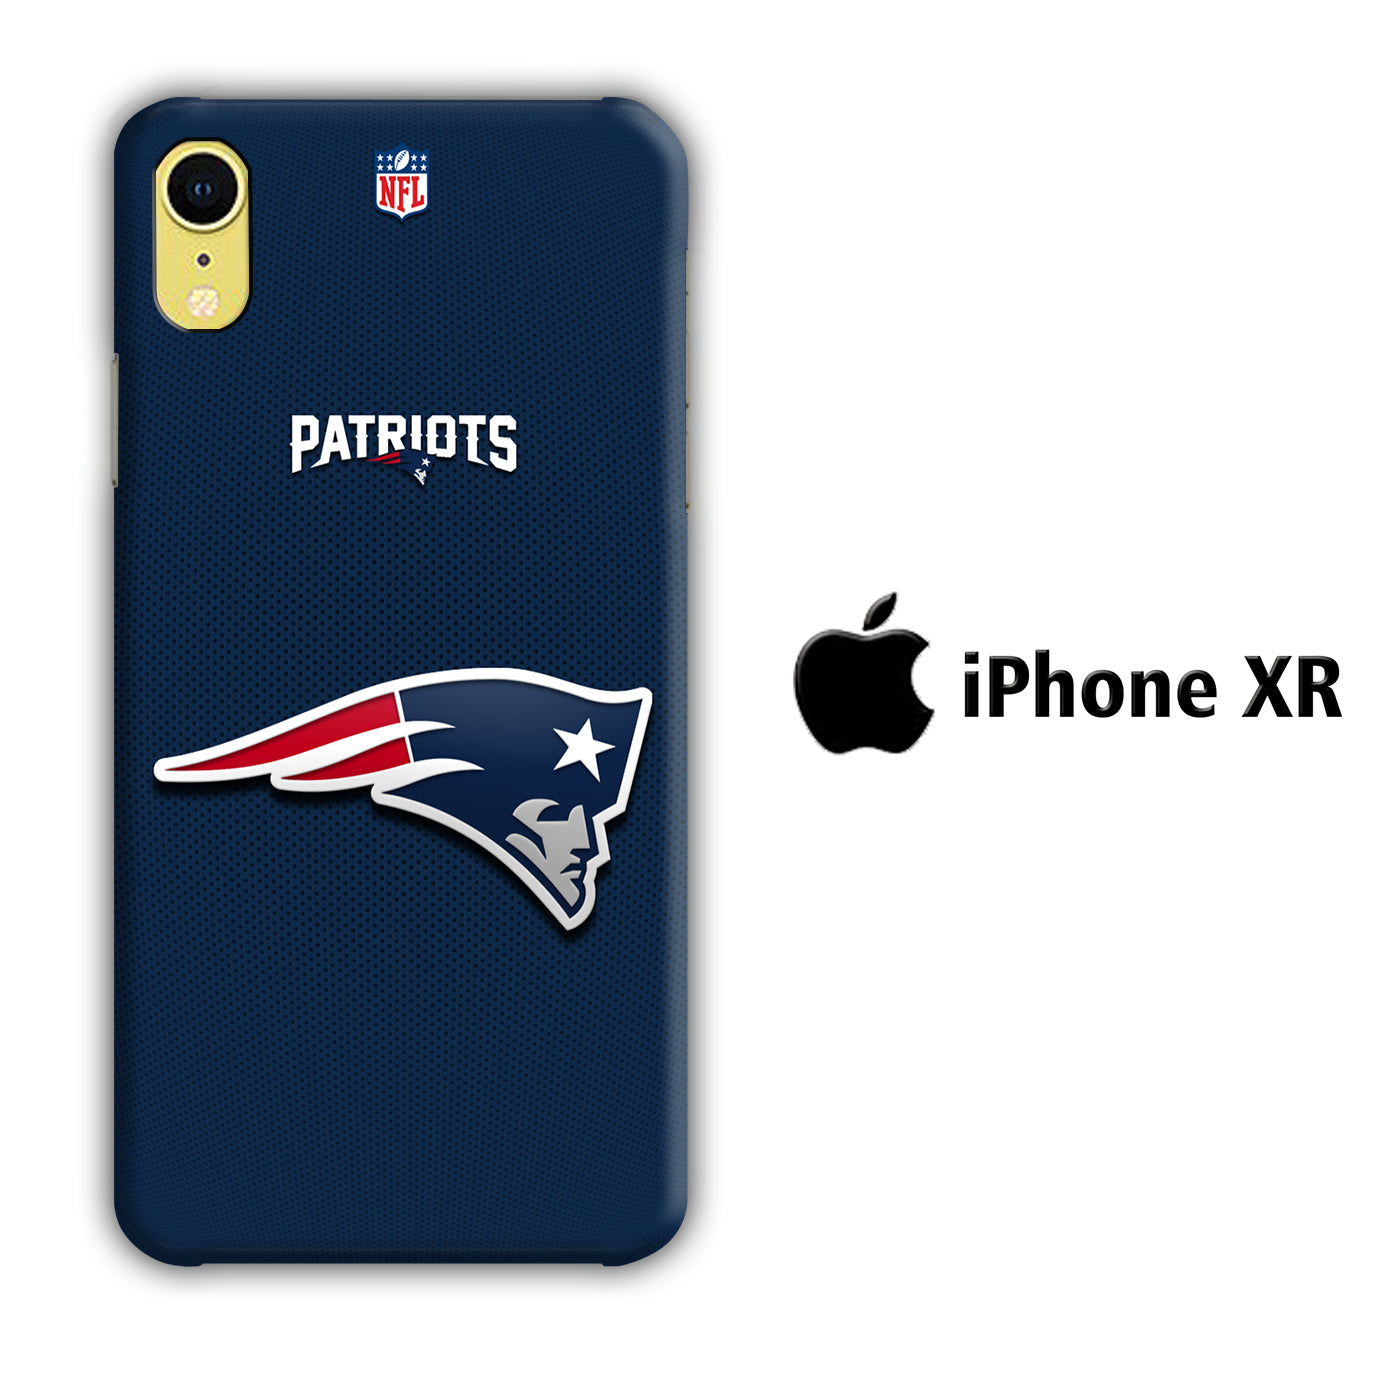 NFL New England Patriots 001 iPhone XR 3D Case - cleverny